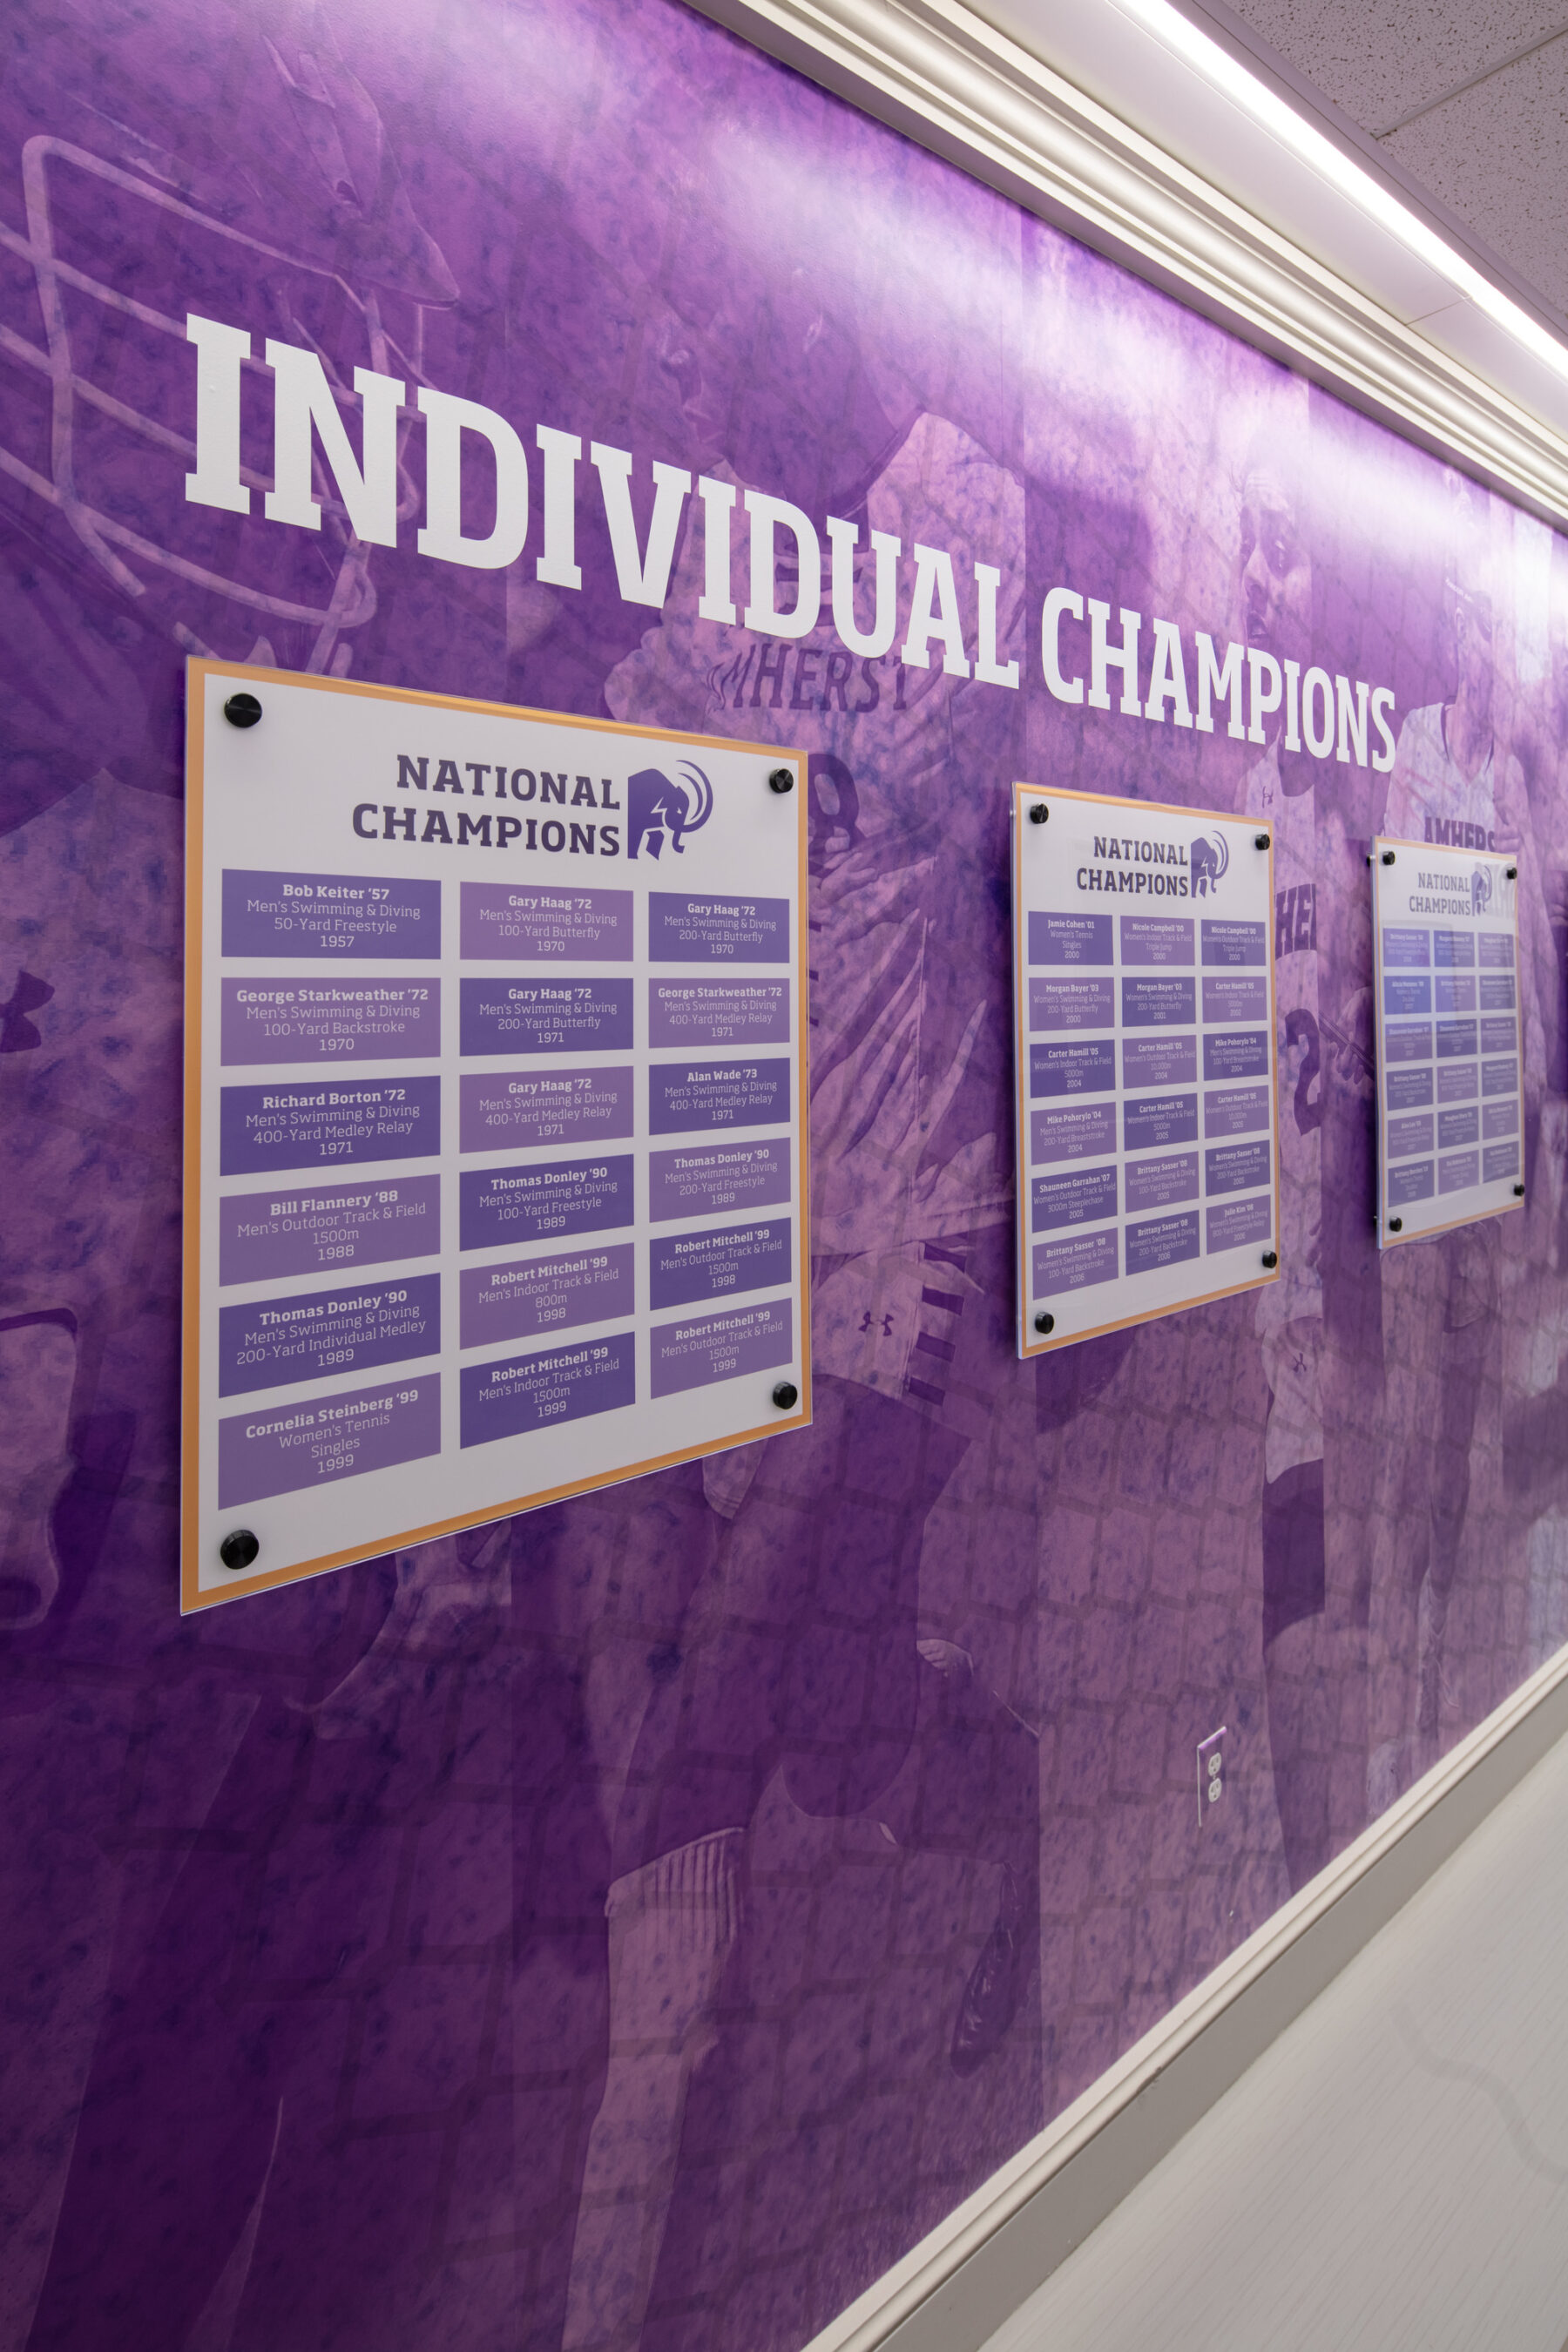 detail photograph of individual champion plaques on wall